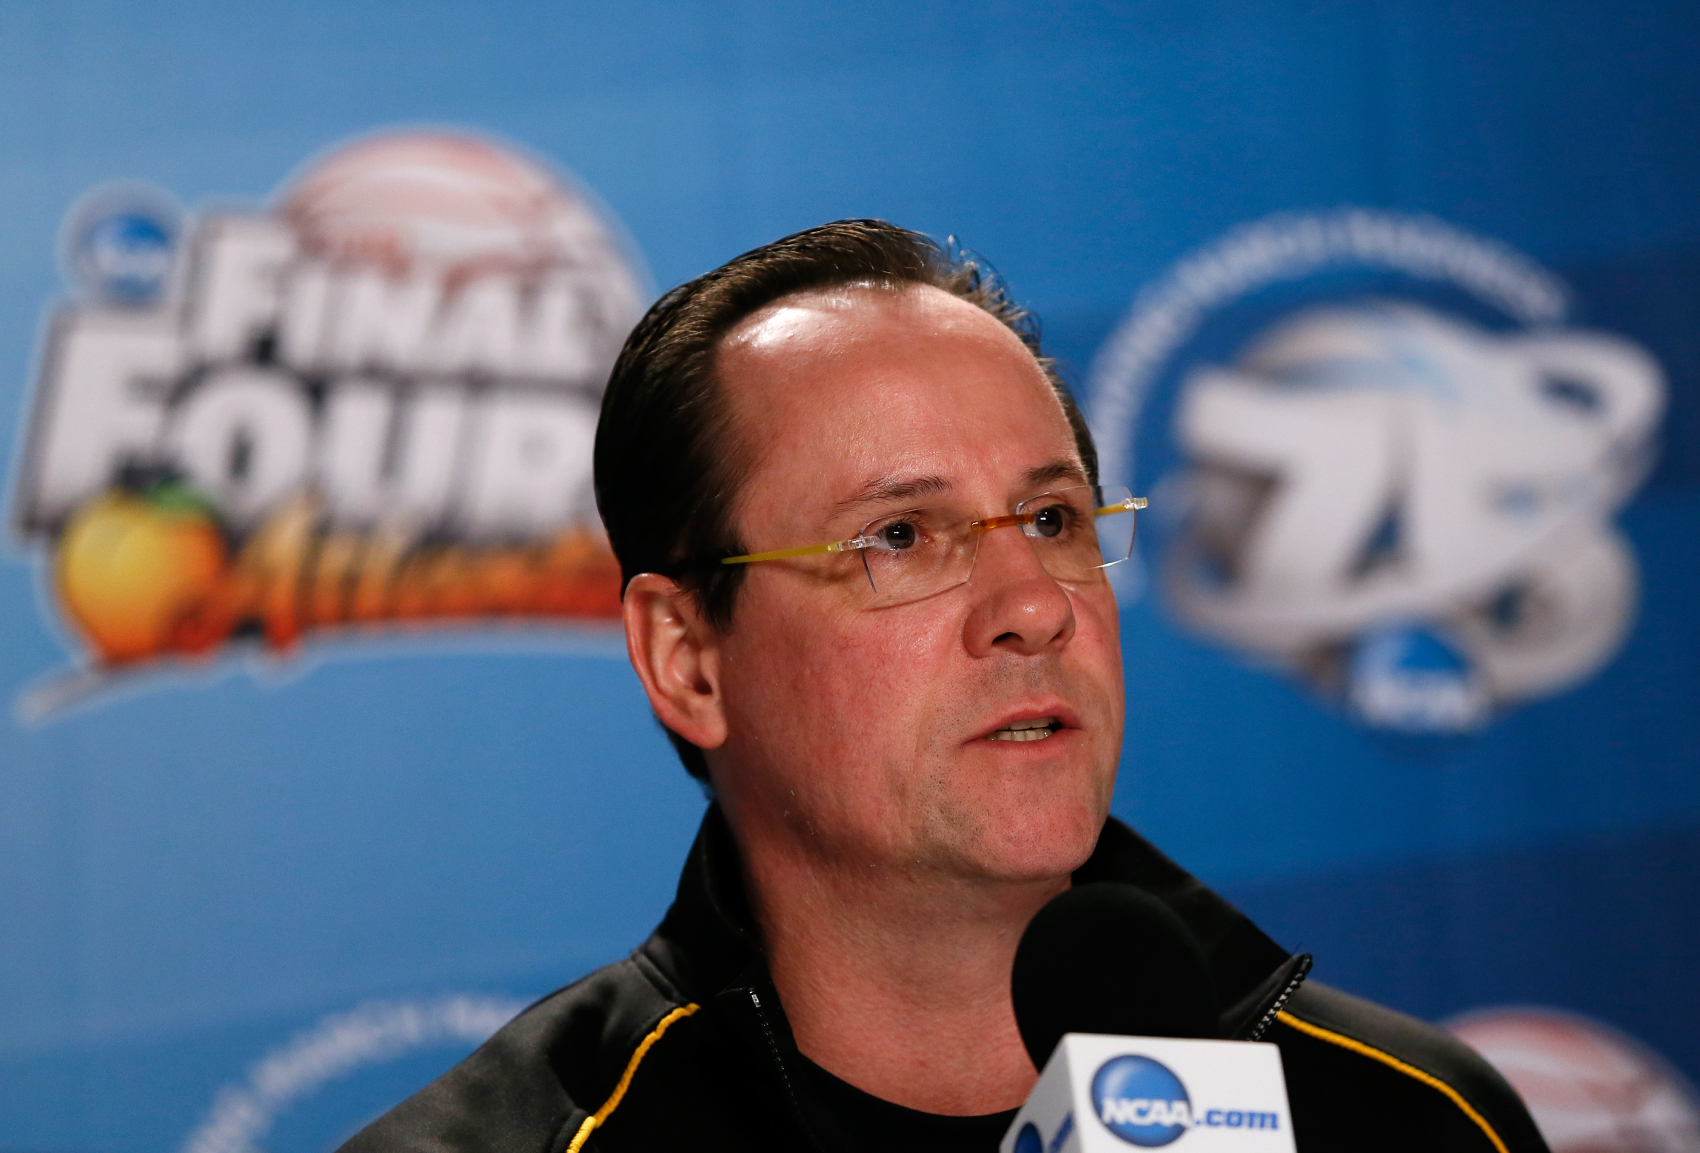 Damning allegations about Wichita State coach Gregg Marshall recently came to light. Based on history, his job could certainly be in jeopardy.